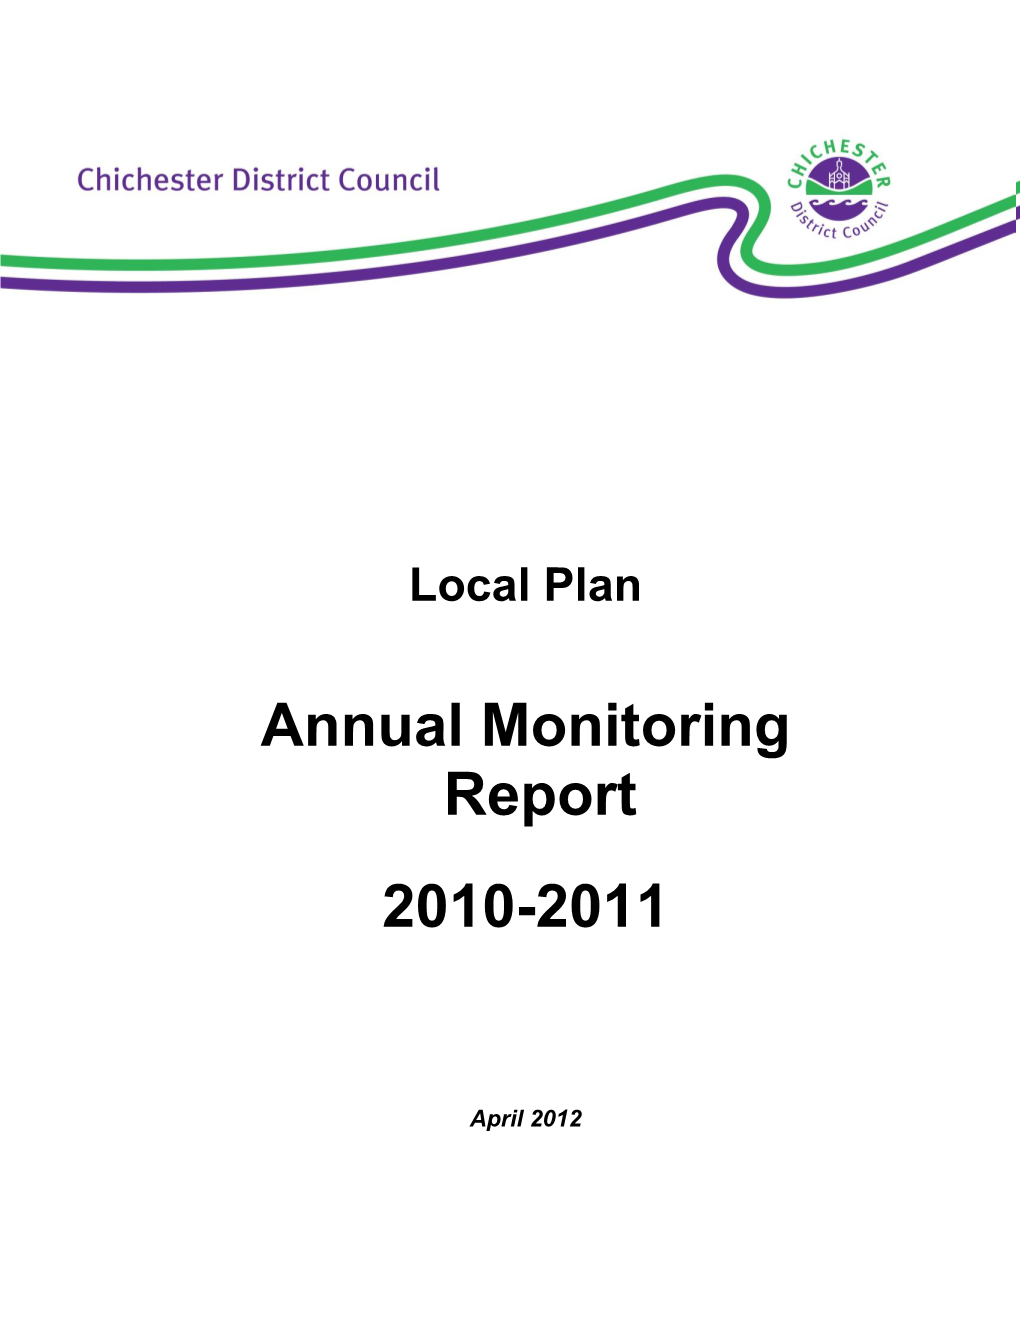 Annual Monitoring Report 2010-2011 3 Housing and Neighbourhoods 429 Net Dwellings Were Built in 2010-2011